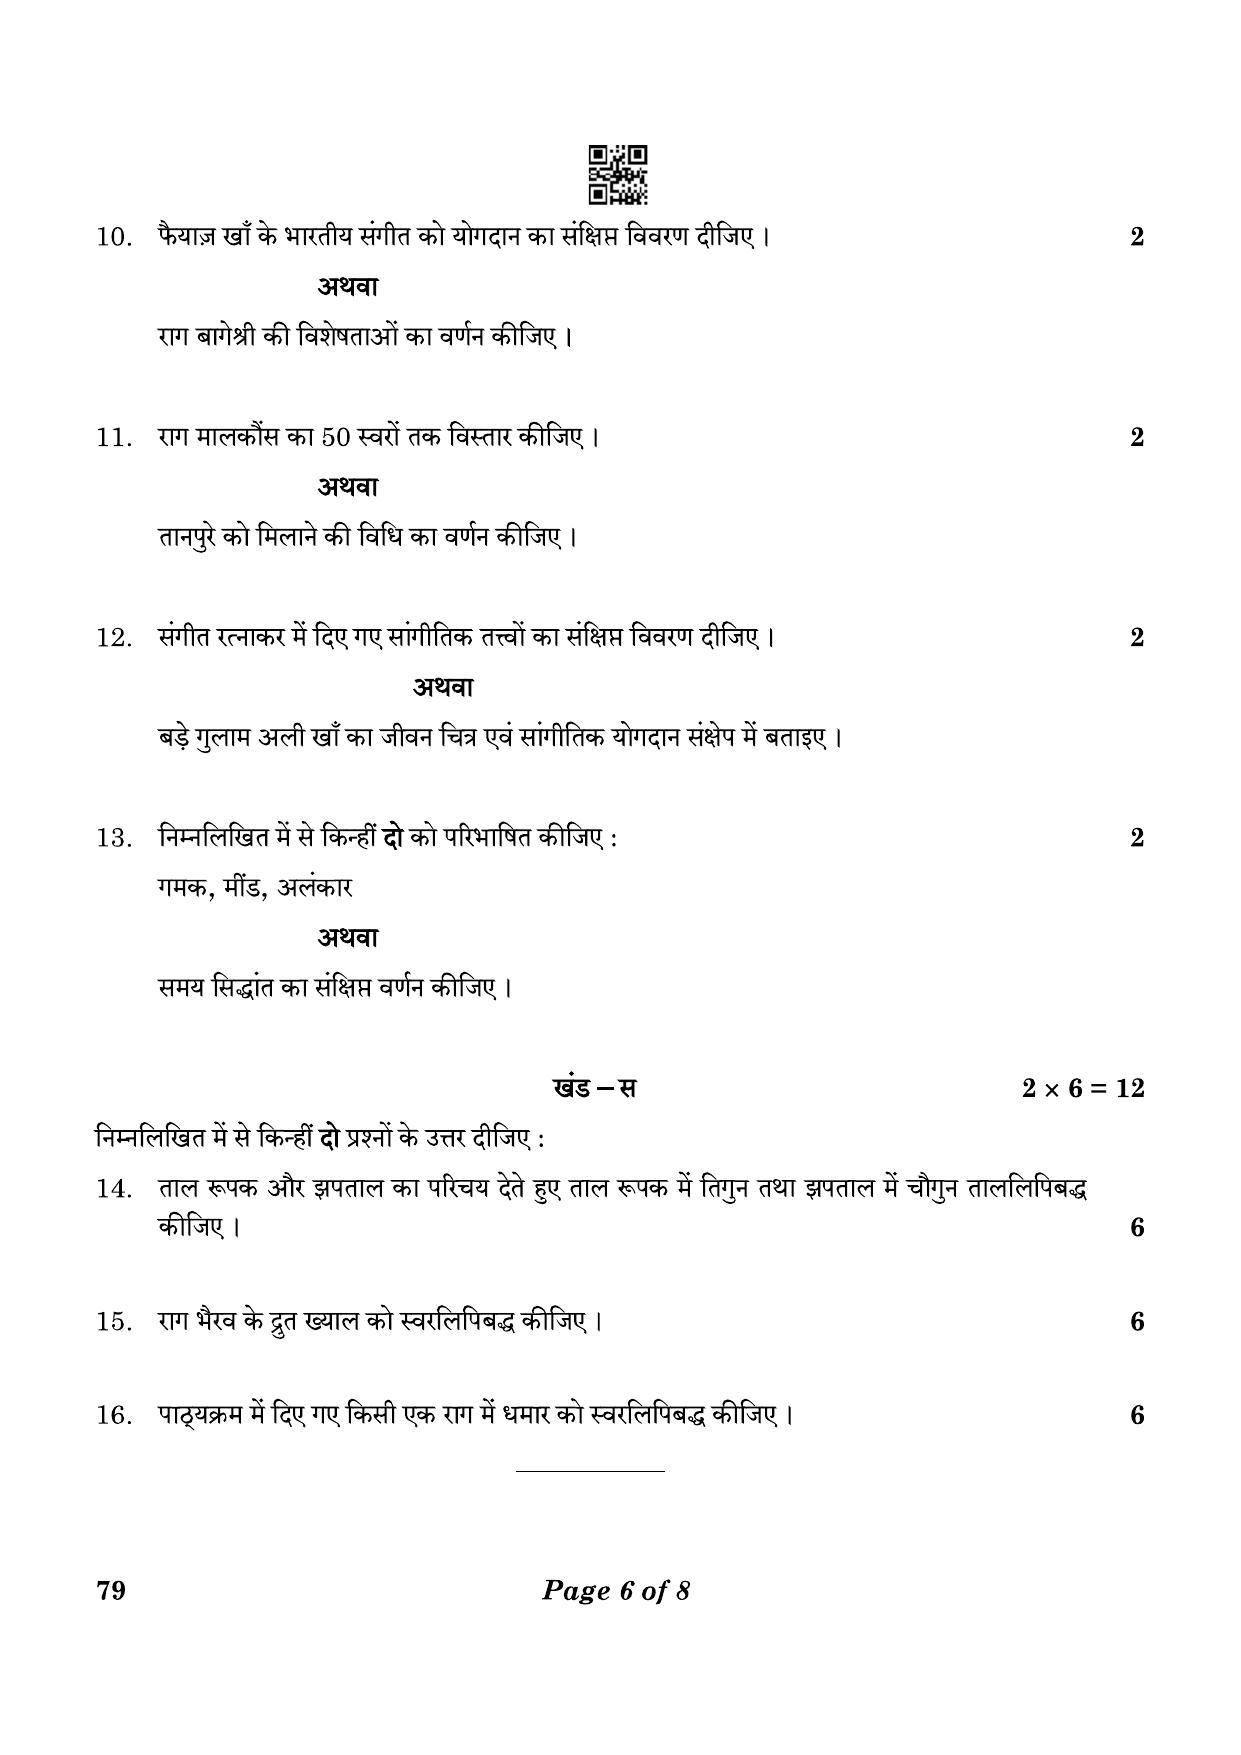 CBSE Class 12 79_Music Hindustani Vocal 2023 Question Paper - Page 6